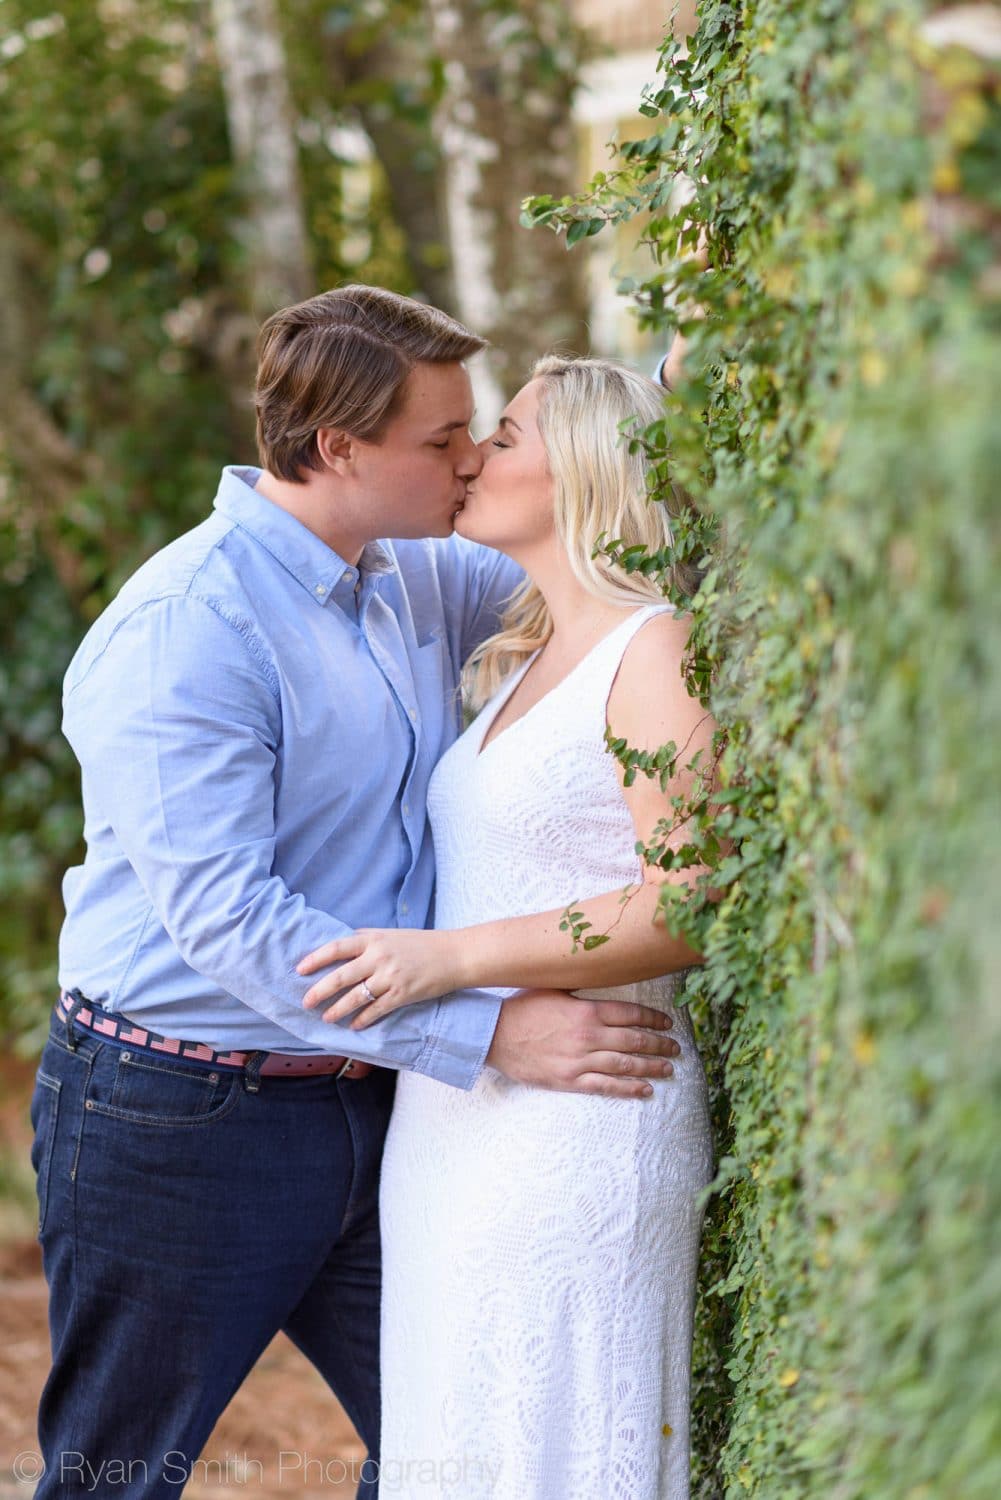 Kiss by the ivy wall - Litchfield Plantation